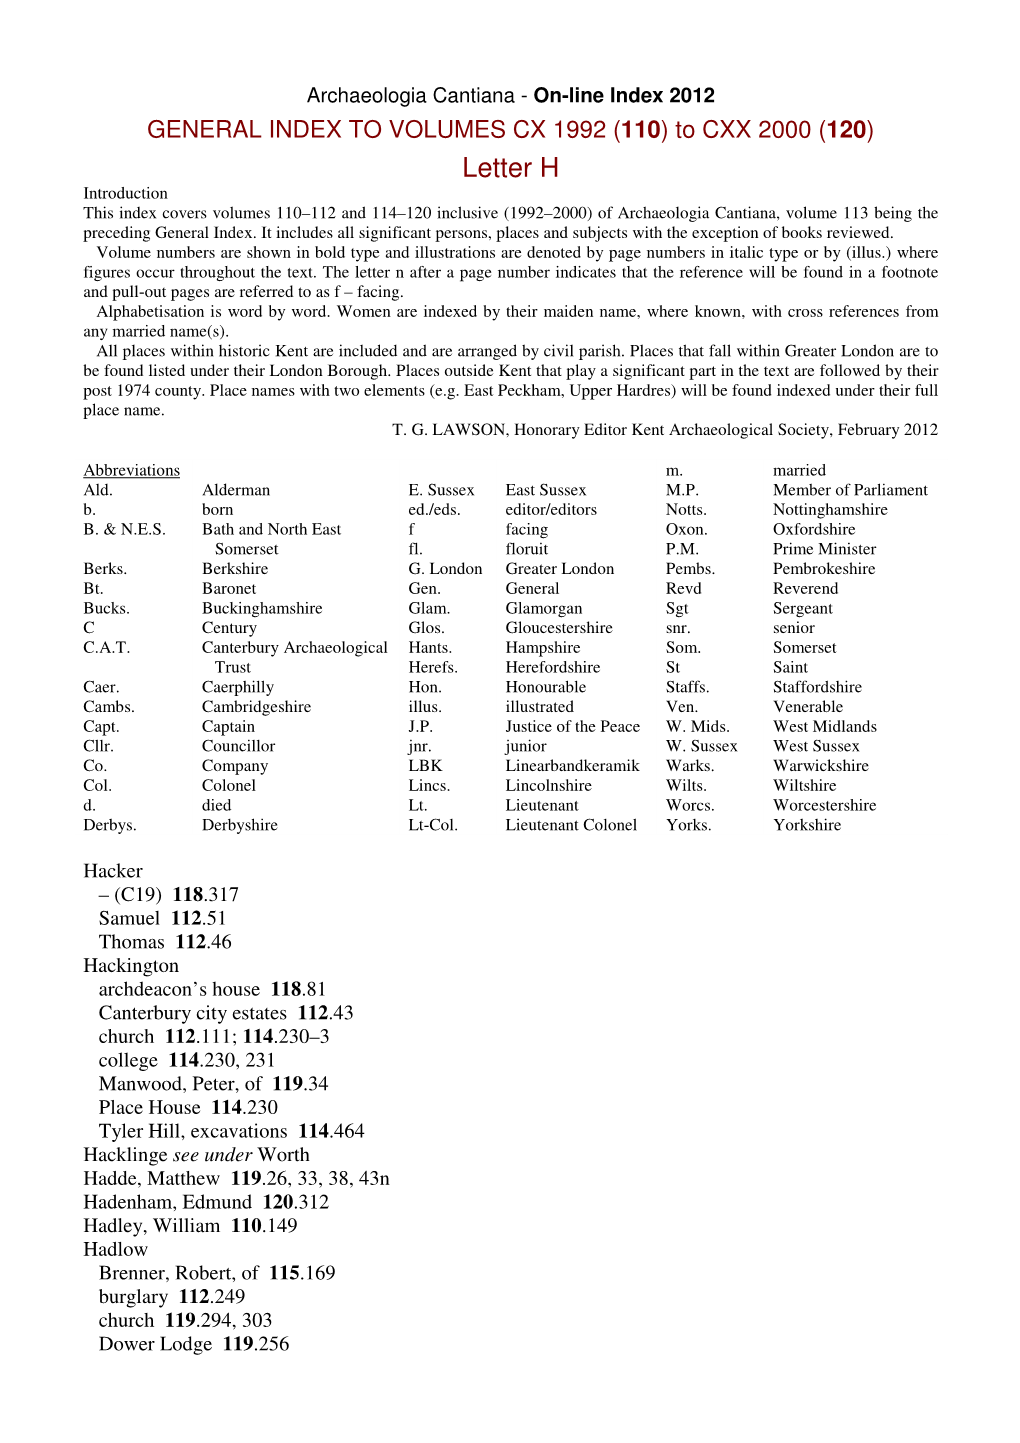 Letter H Introduction This Index Covers Volumes 110–112 and 114–120 Inclusive (1992–2000) of Archaeologia Cantiana, Volume 113 Being the Preceding General Index